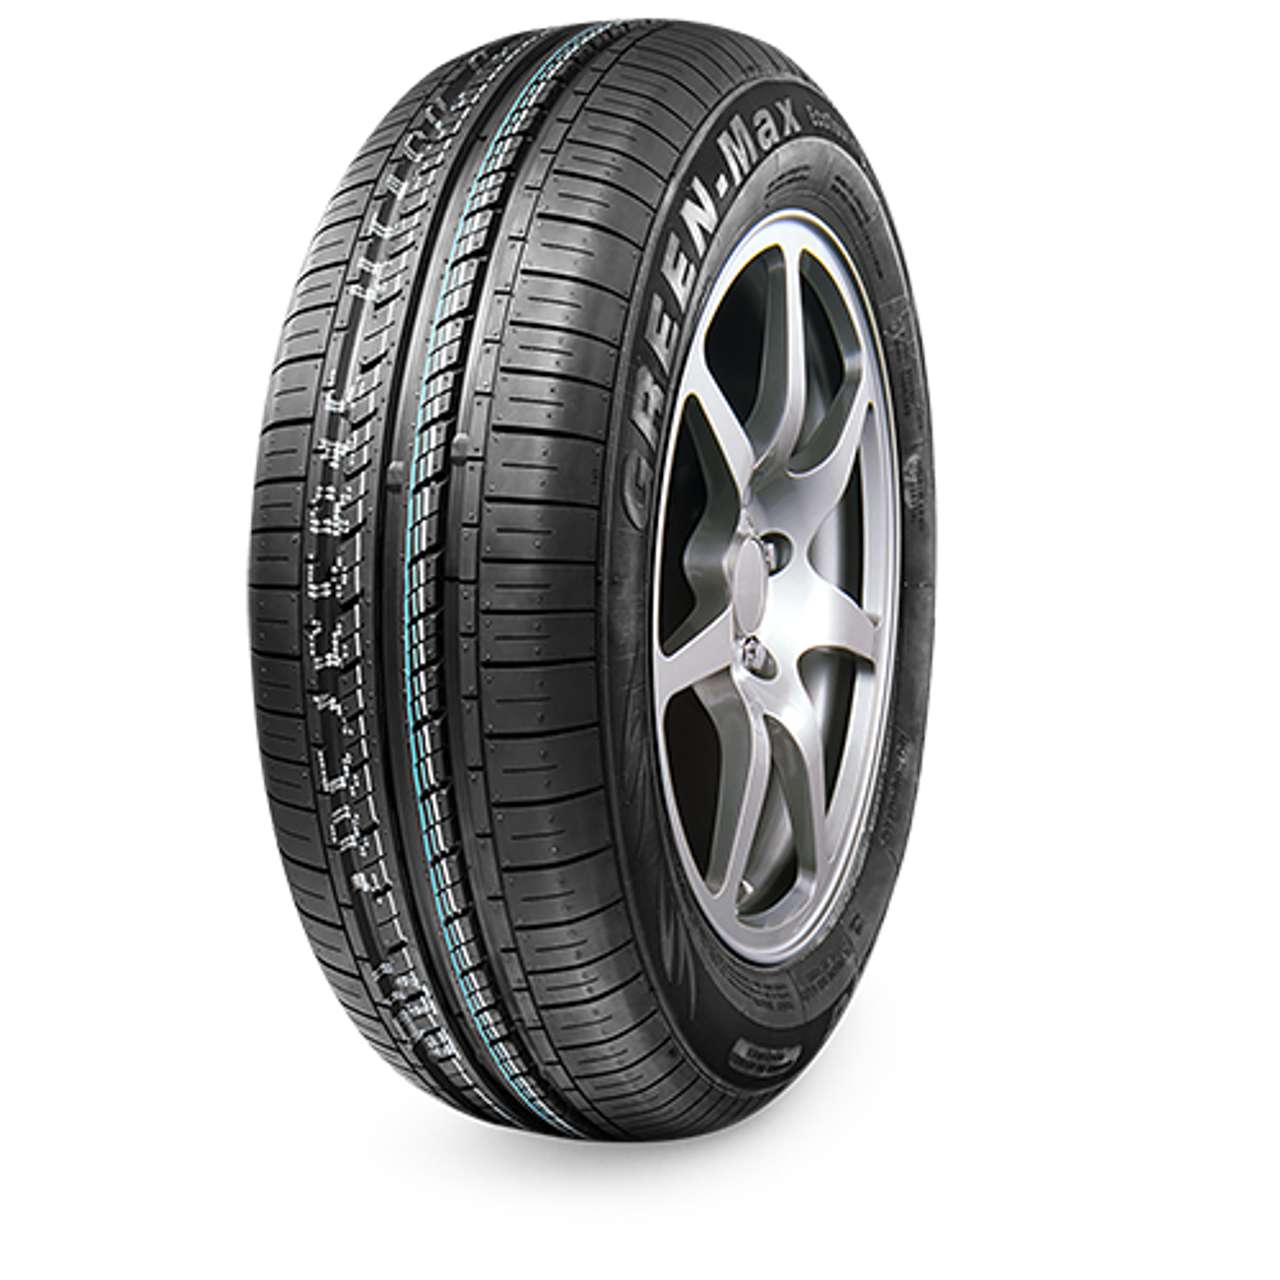 LINGLONG GREEN-MAX ECOTOURING 195/70R14 91T BSW